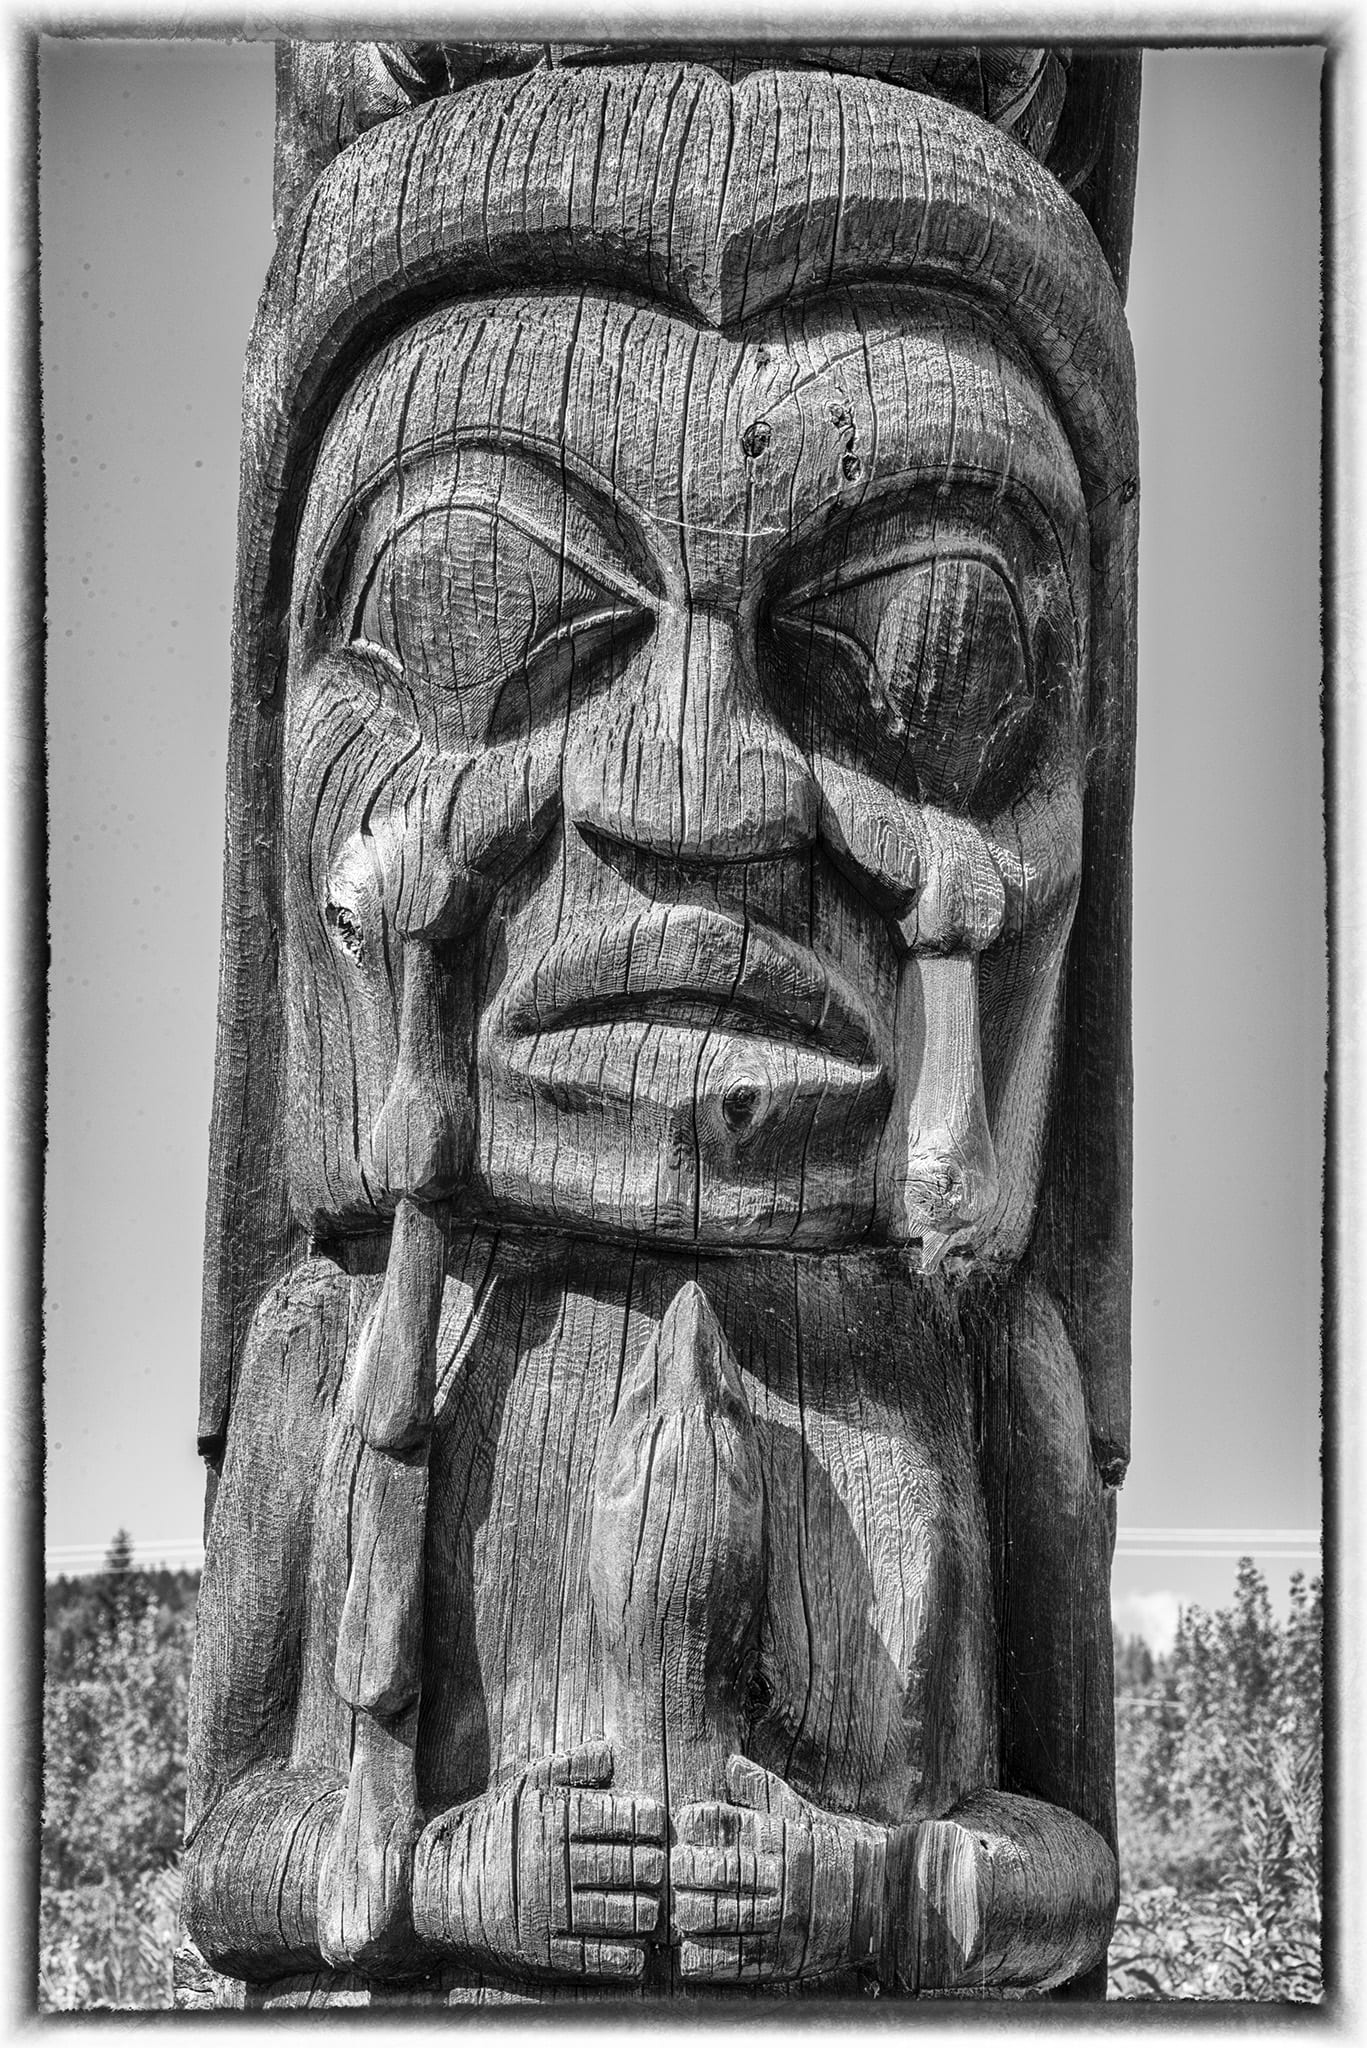 Detail of Weeping Woman Totem Pole, Kispiox, British Columbia, Canada.